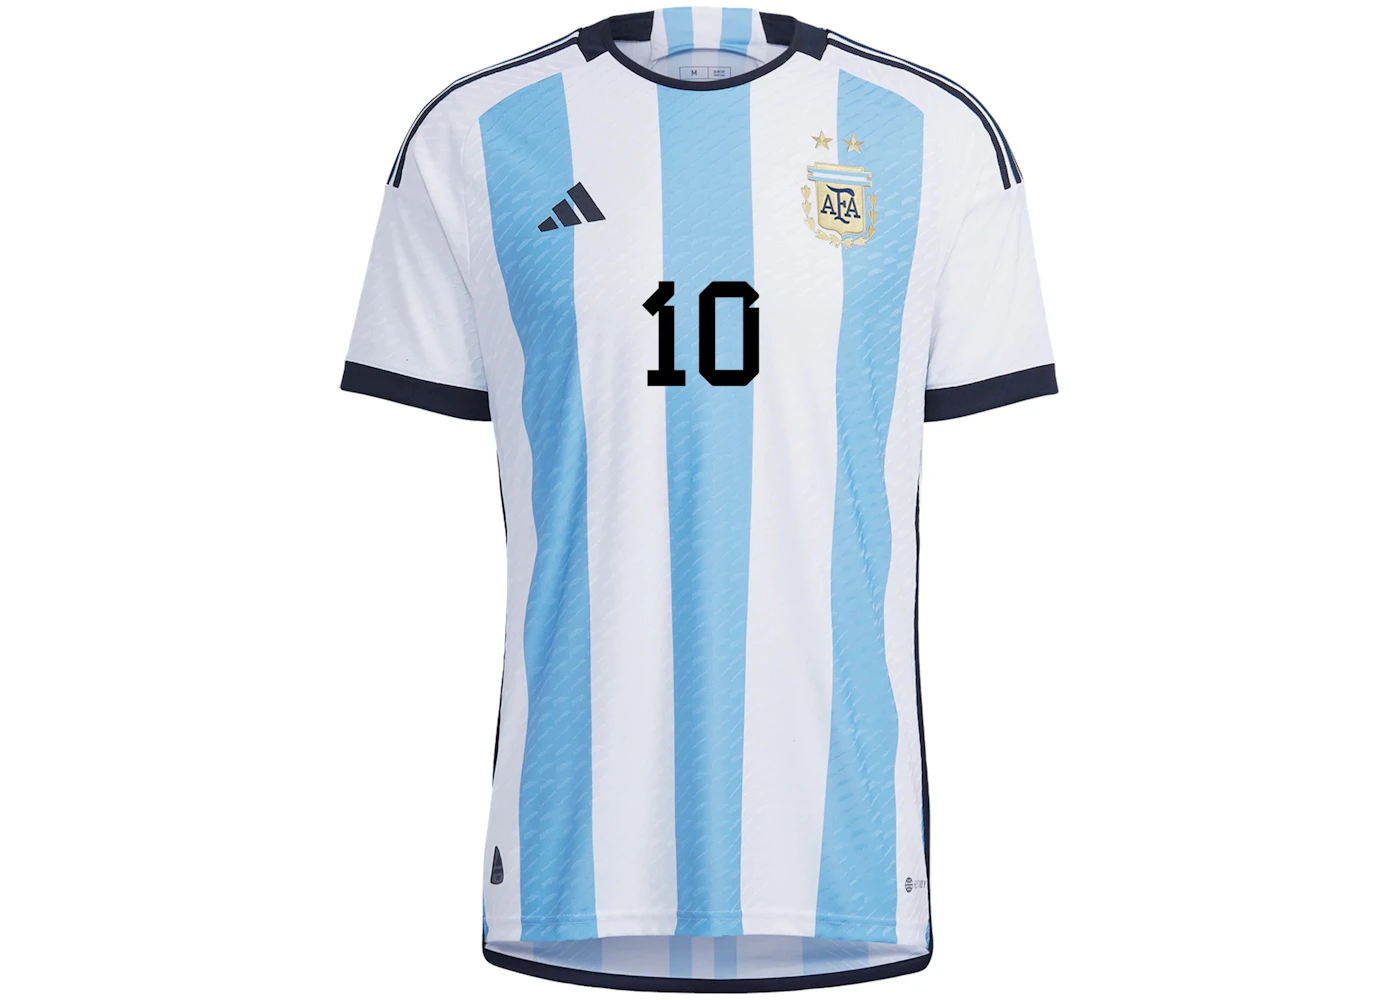 argentina jersey messi near me